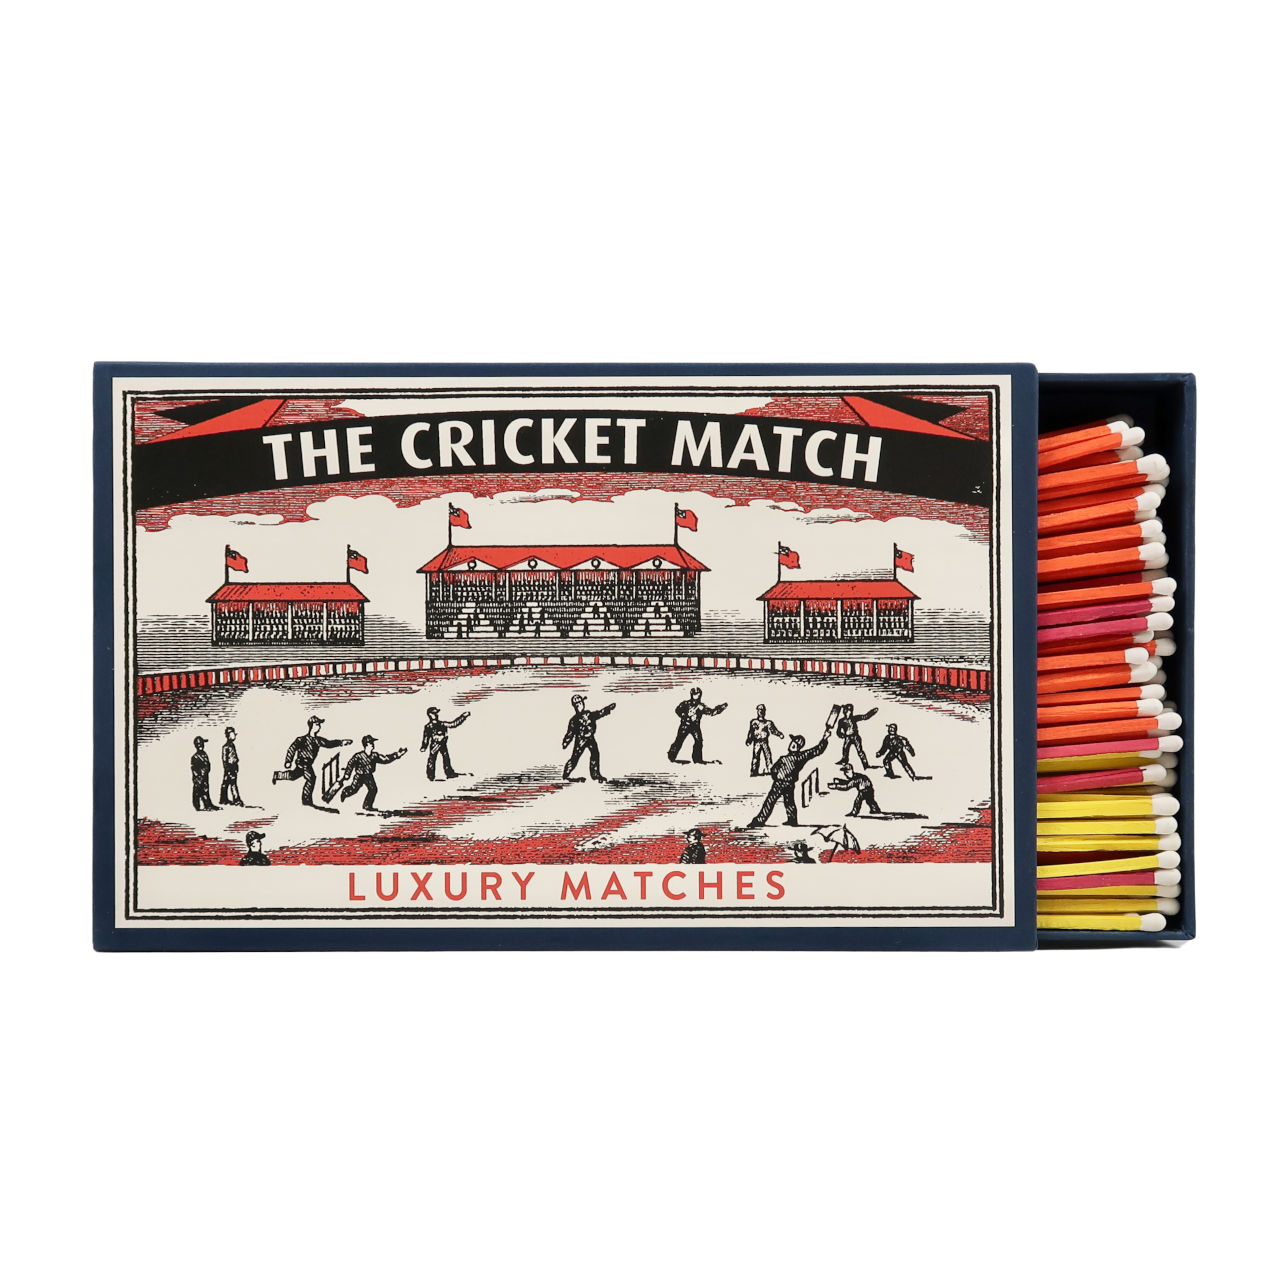 Archivist Giant Box of Matches - The Cricket Match